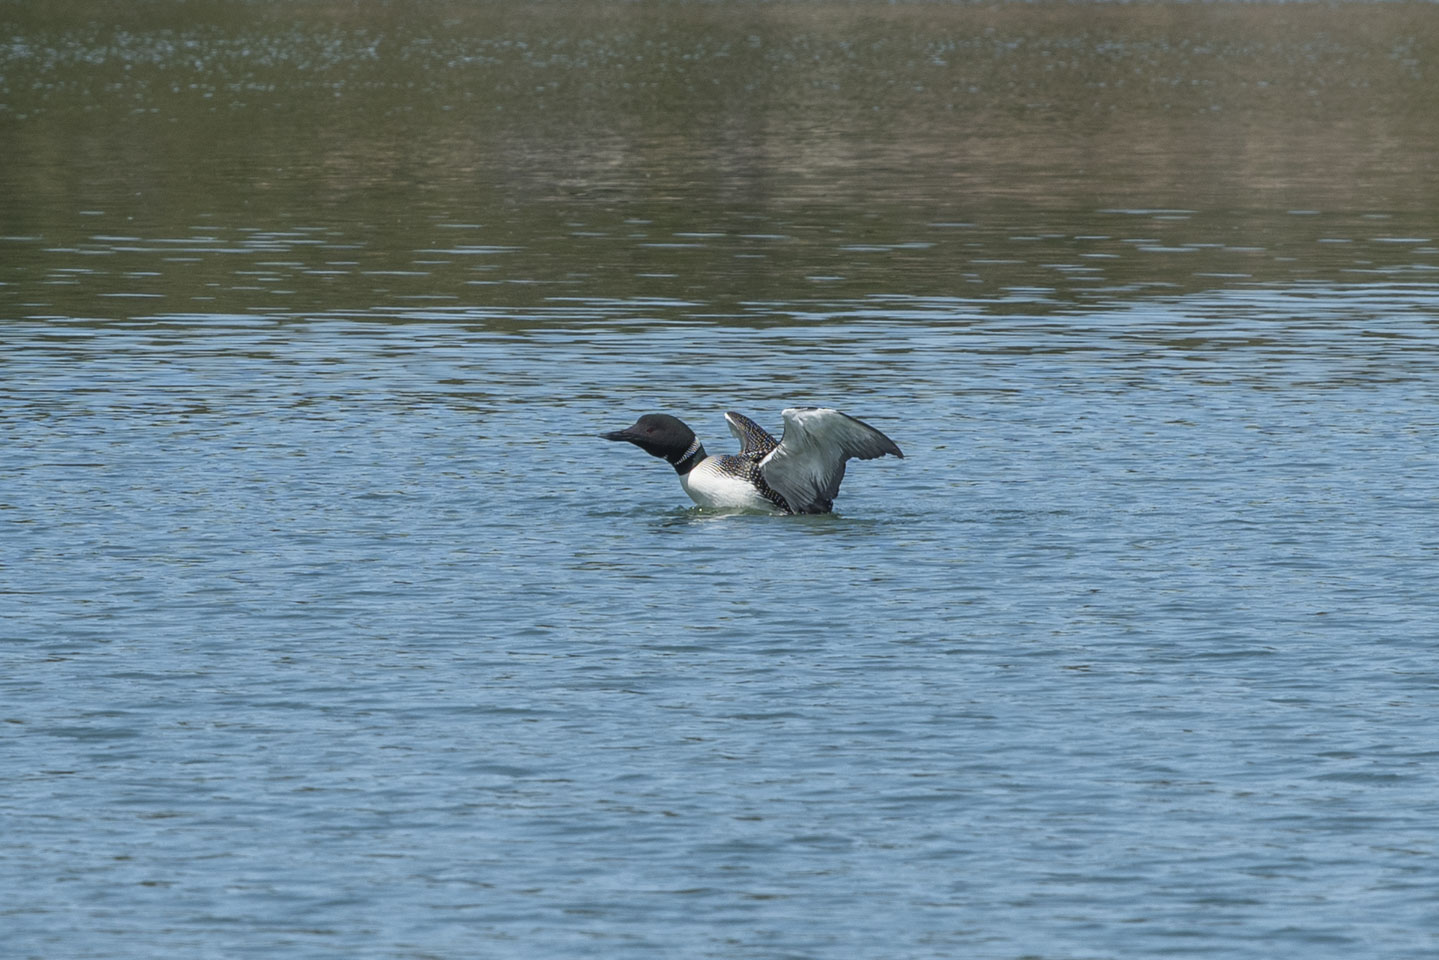 Loon in the water